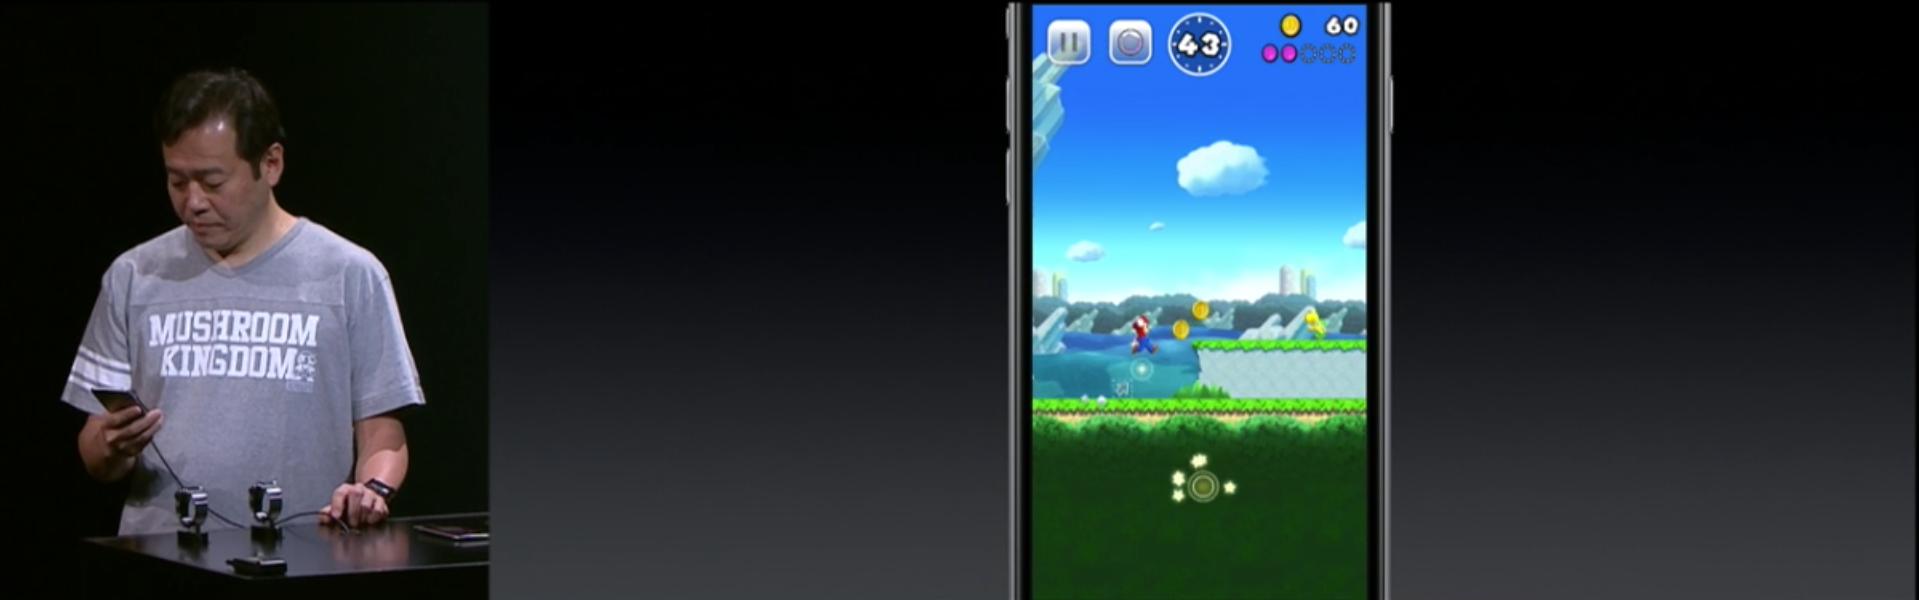 Nintendo brings Super Mario Run to iPhone 7 with December release date